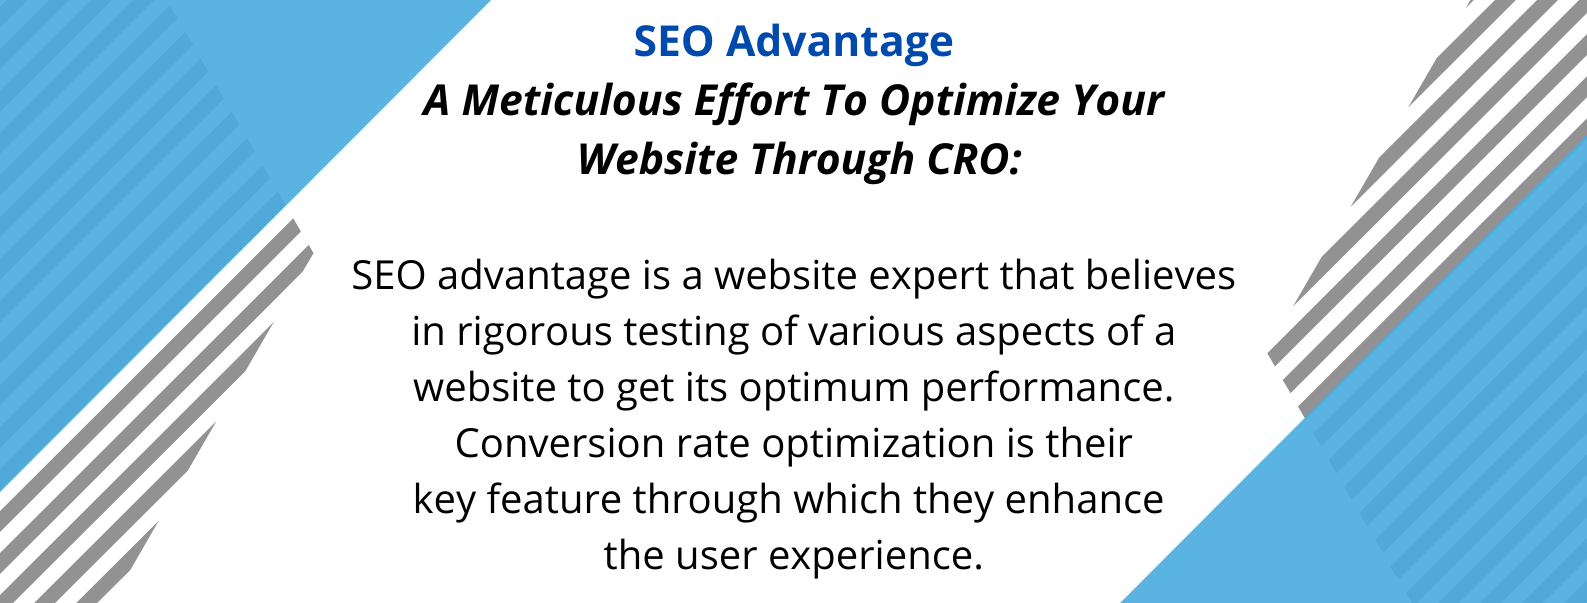 SEO Advantage - one of the best SEO agencies in Australia - with its unique selling propositions